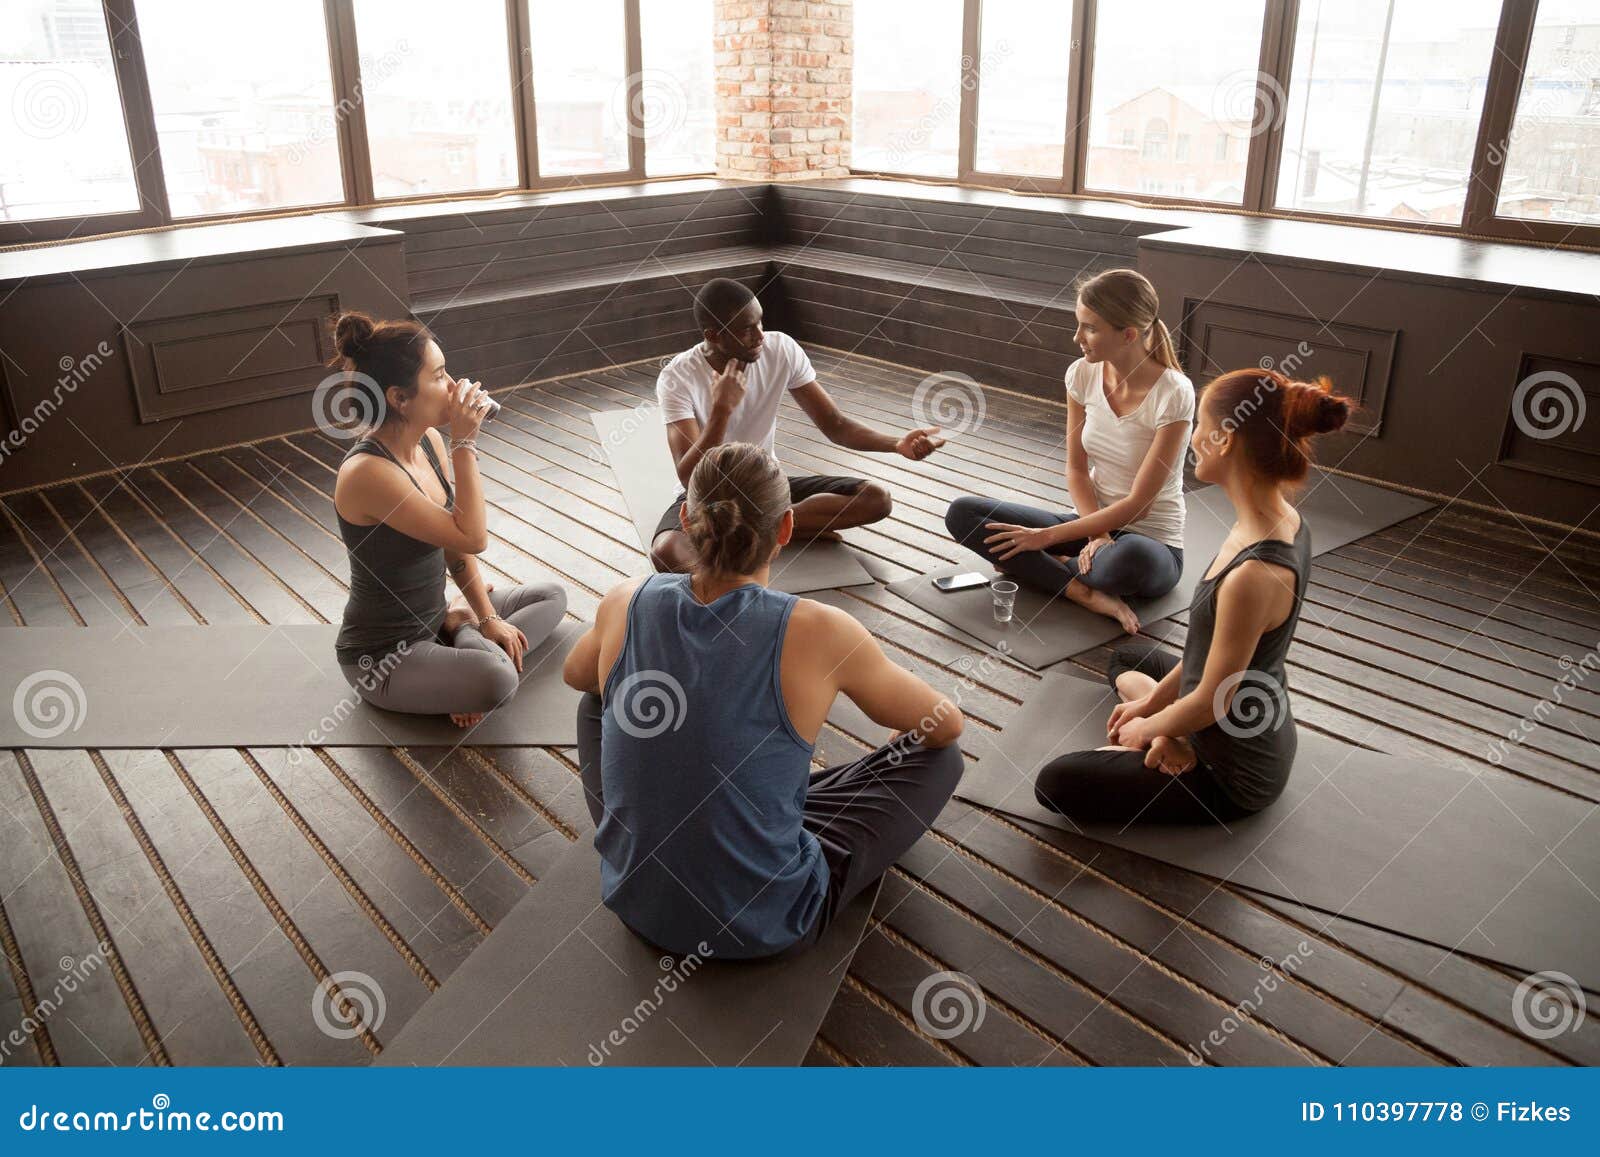 african-american yoga instructor talking to diverse group sittin